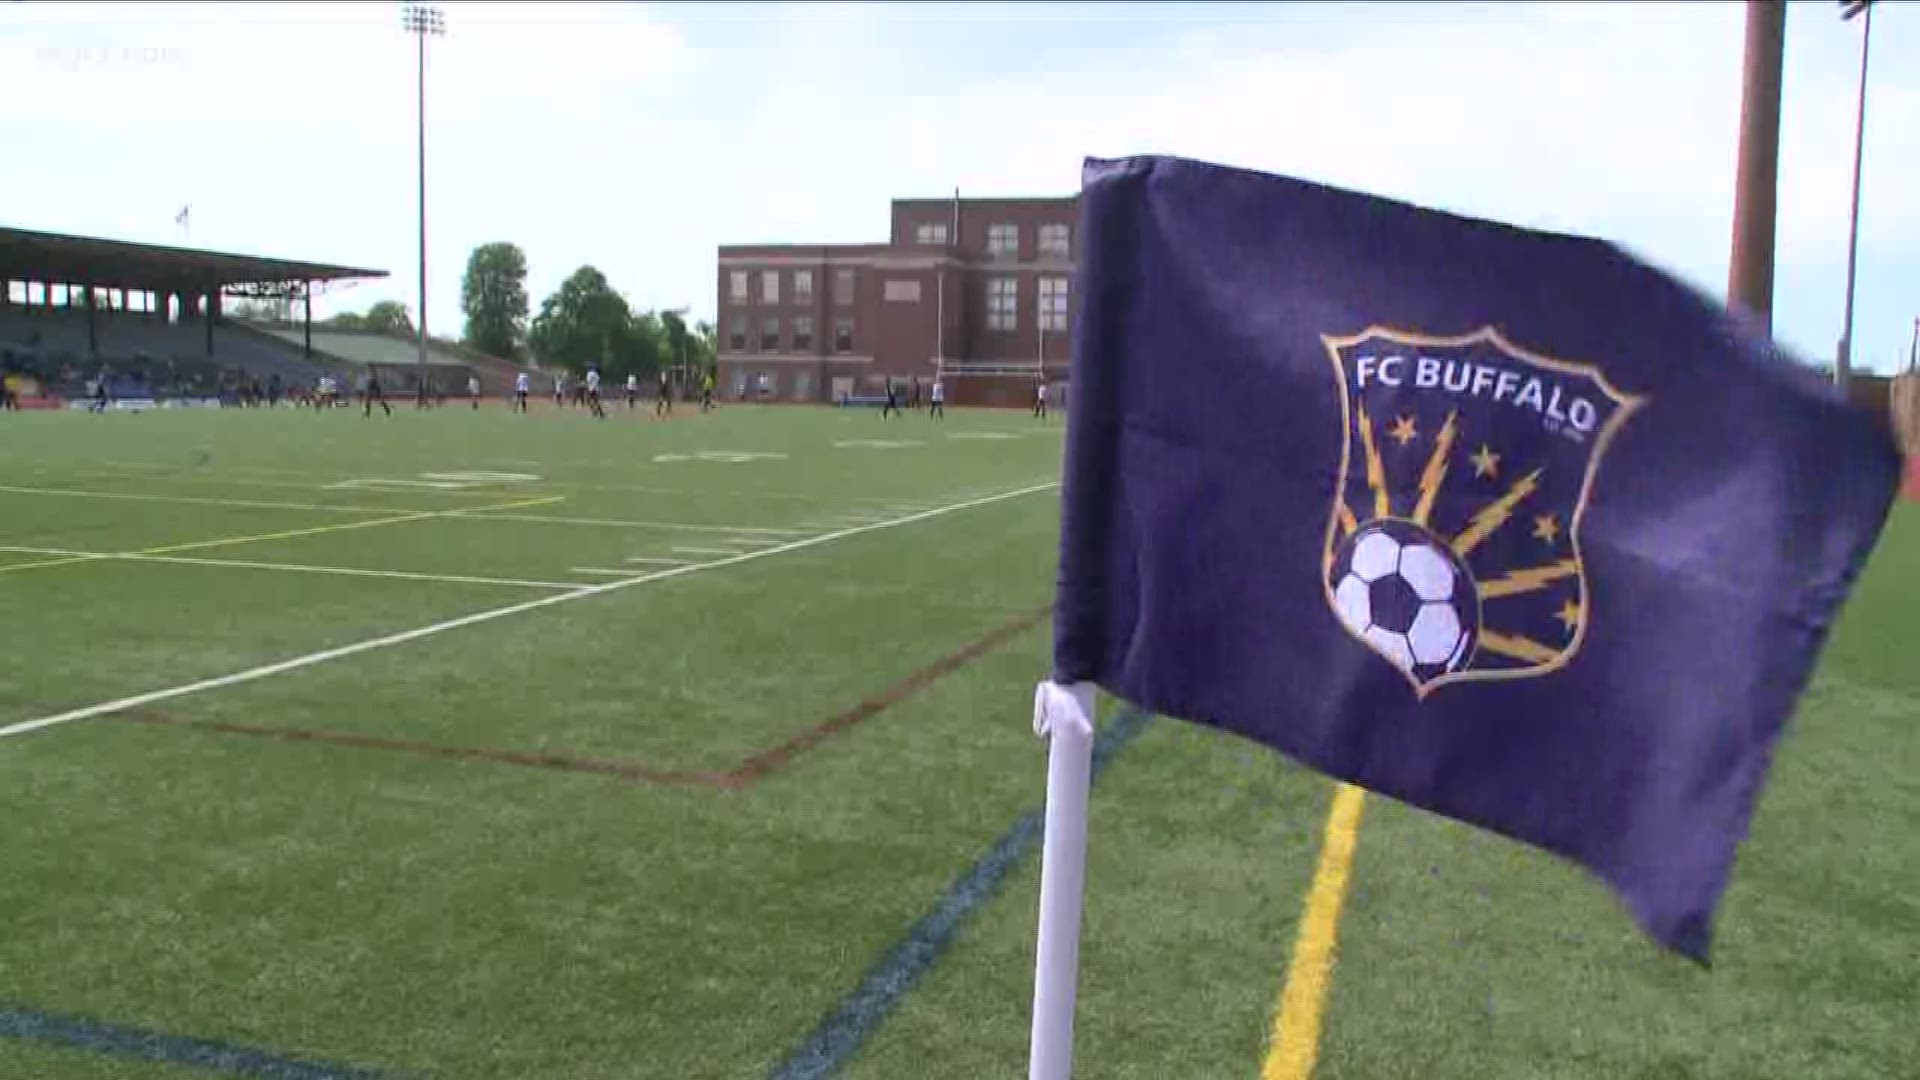 The 2. Bundesliga side from across the pond took on FC Buffalo at All-High Stadium, one of the biggest moments in the history of the 10-year-old local club.